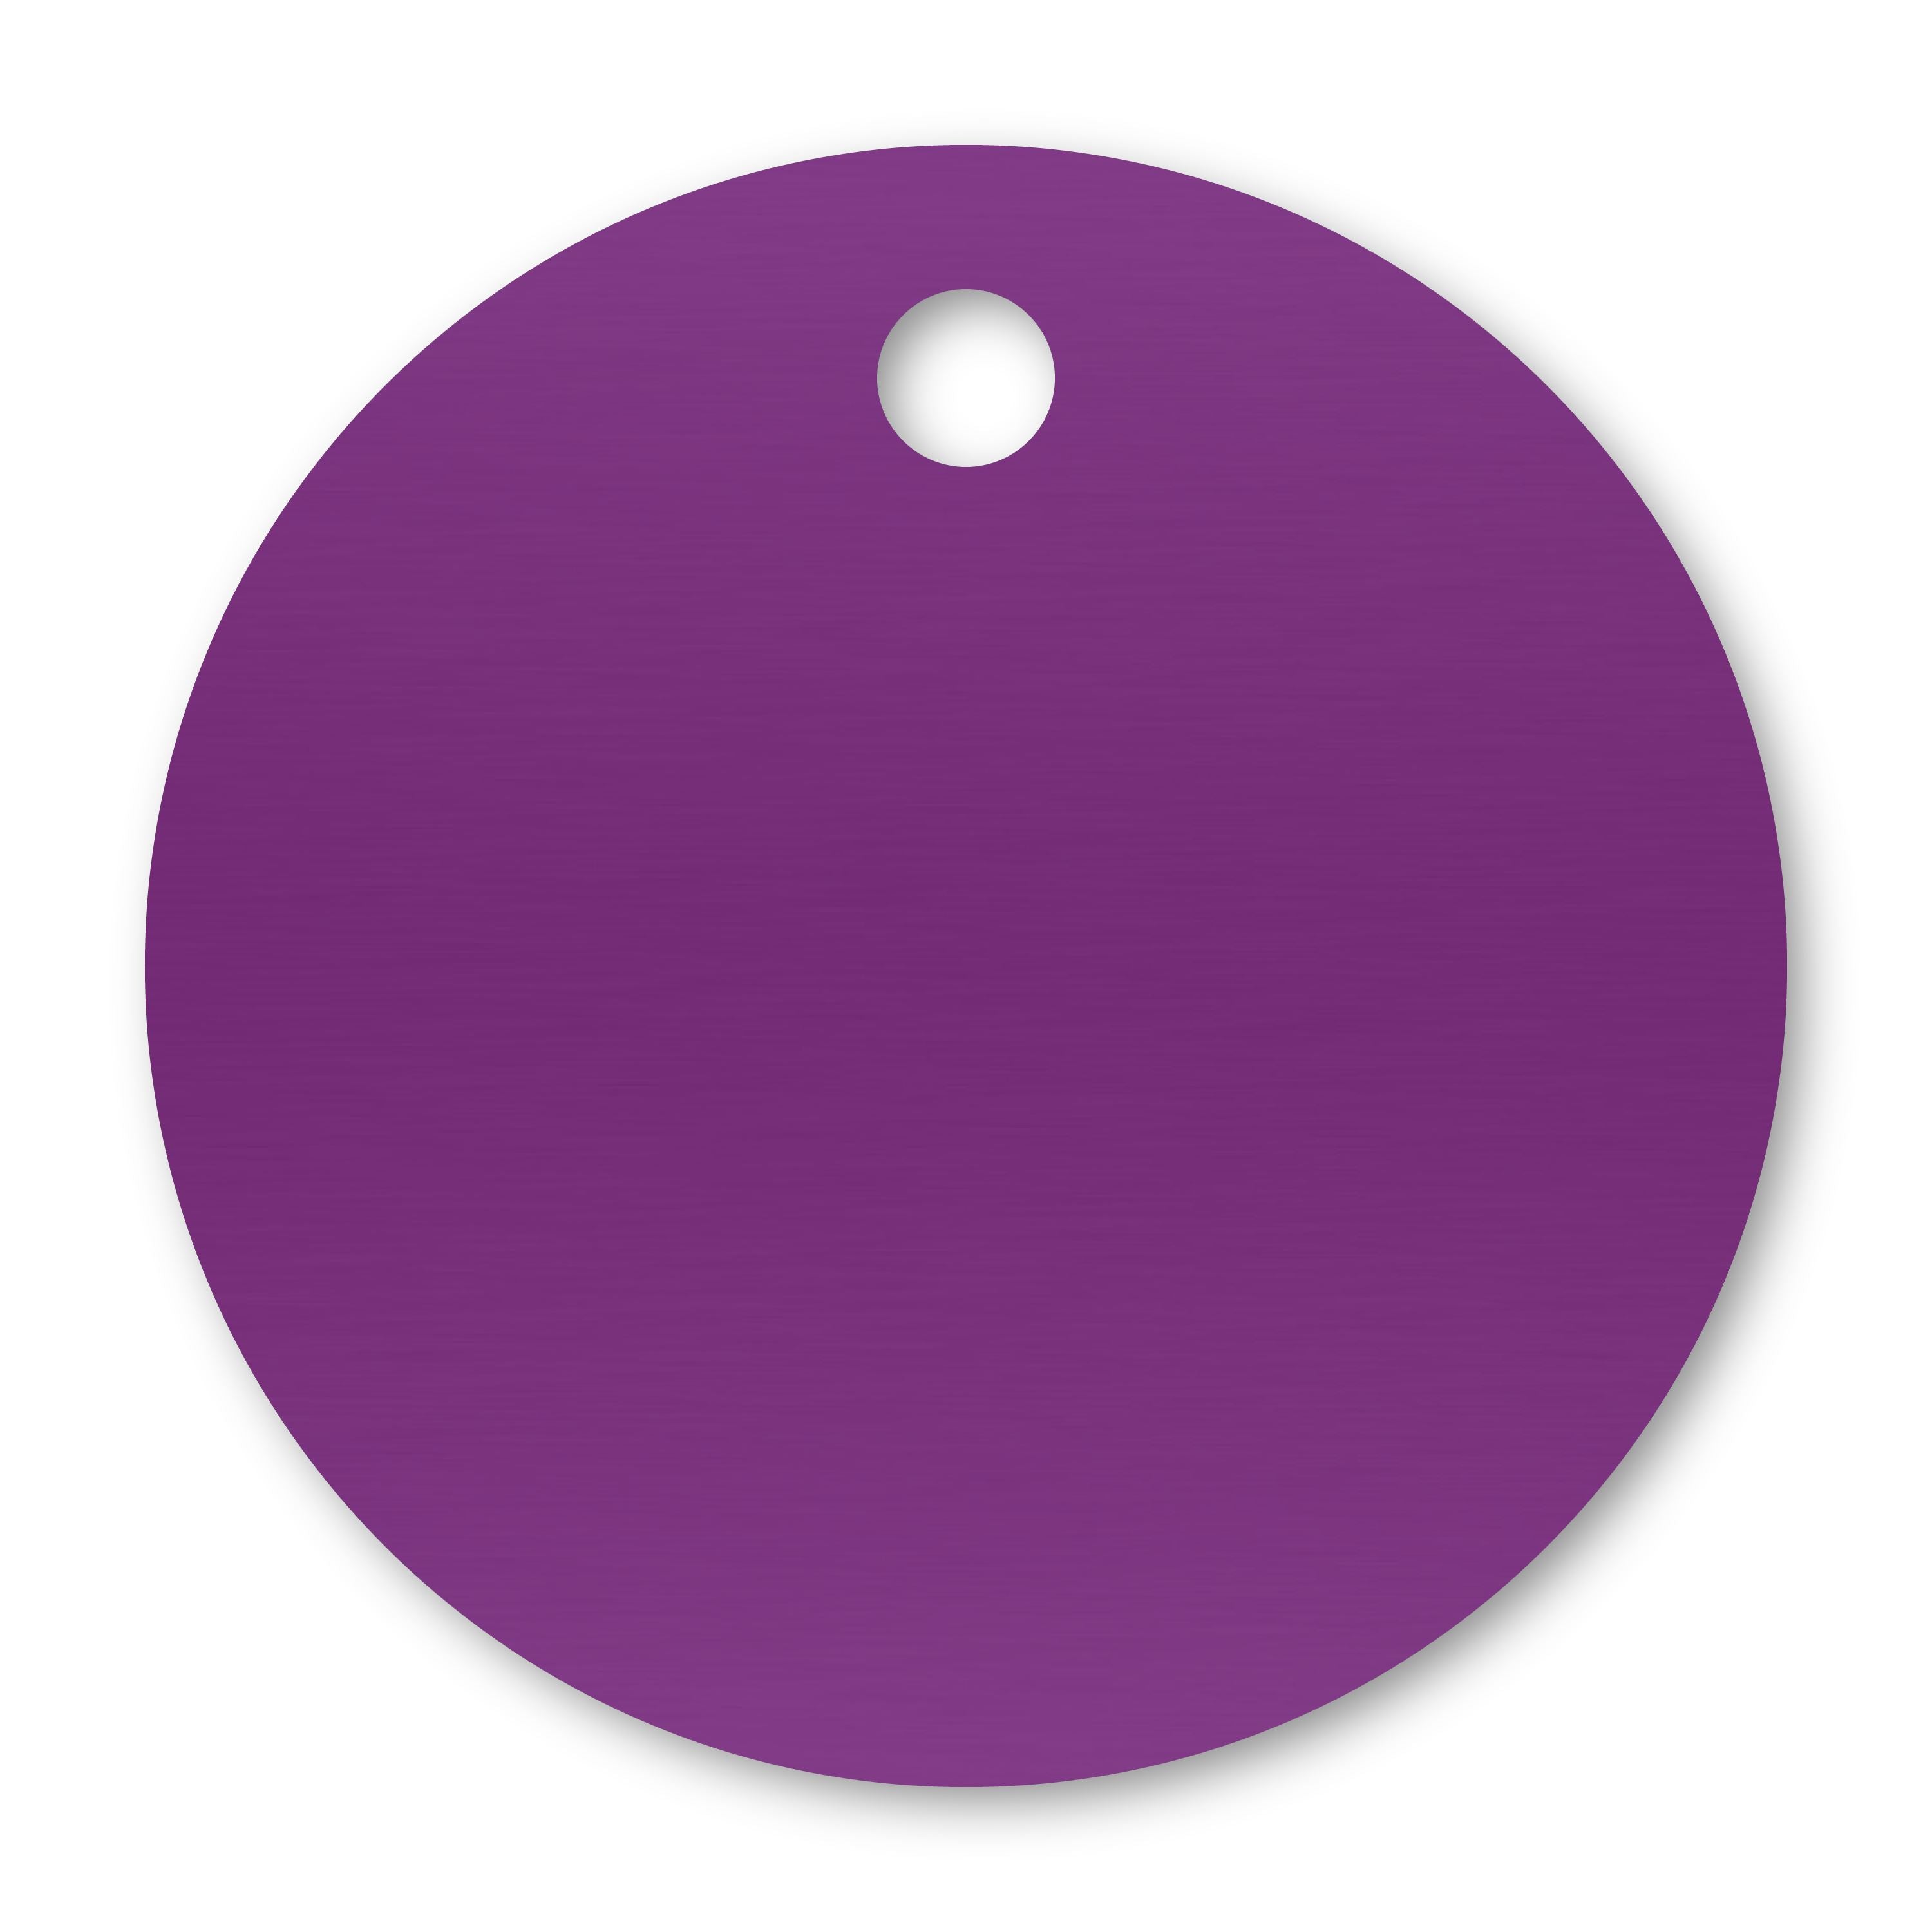 Anodized Aluminum Round Tags, 7/8" with 3/32" Hole, Laser Engraved Metal Tags Craftworks NW Purple 